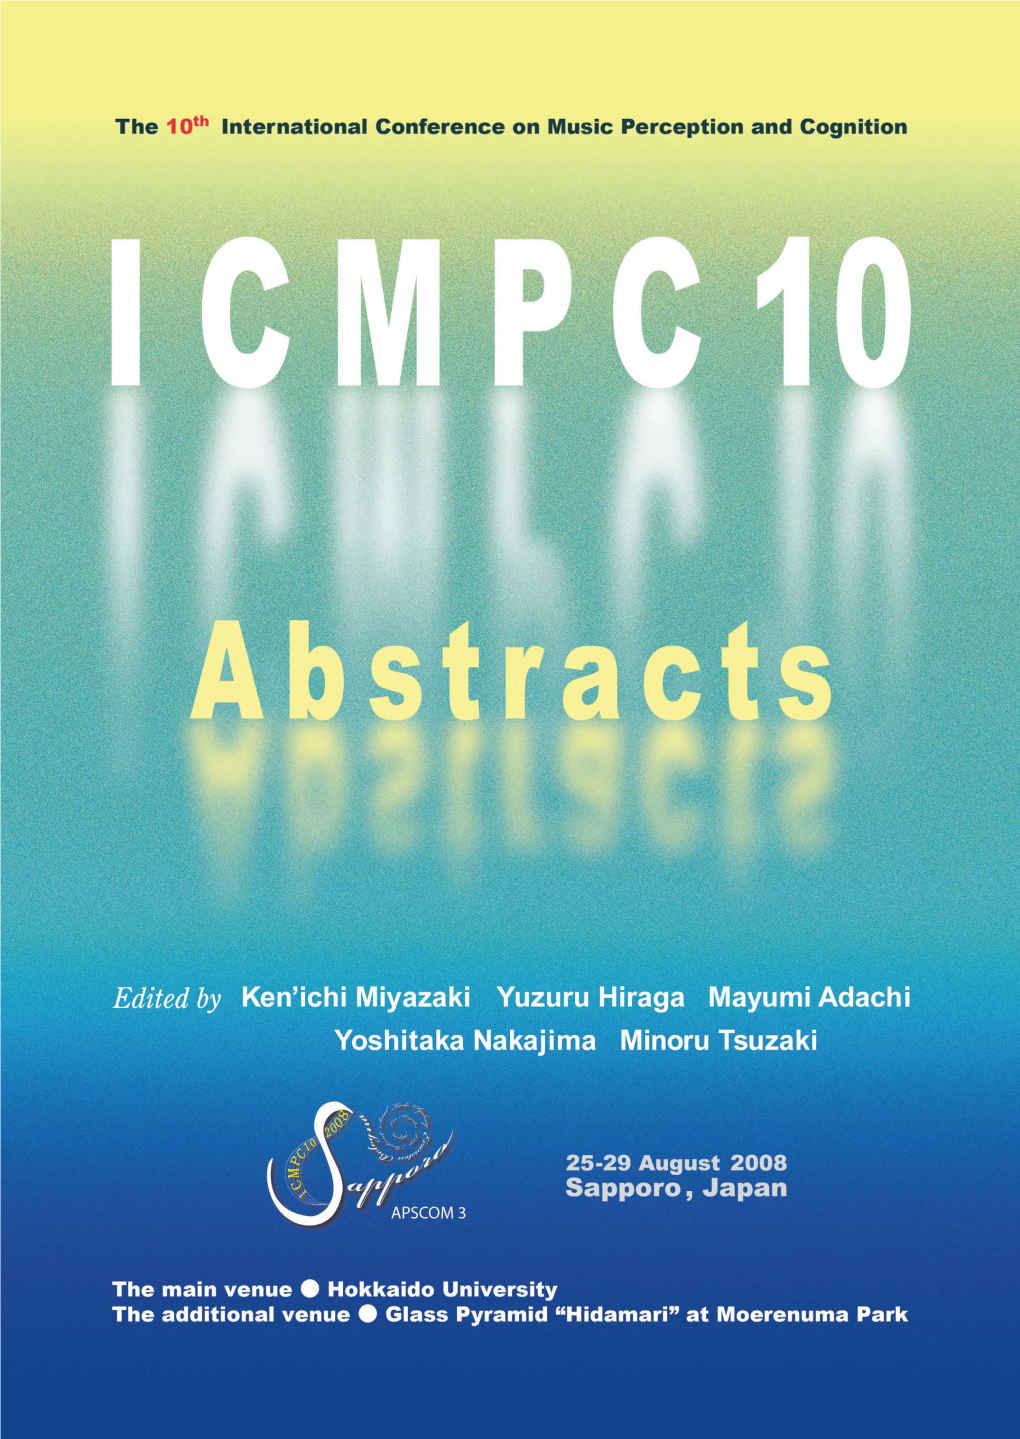 ICMPC 10 Abstracts Book